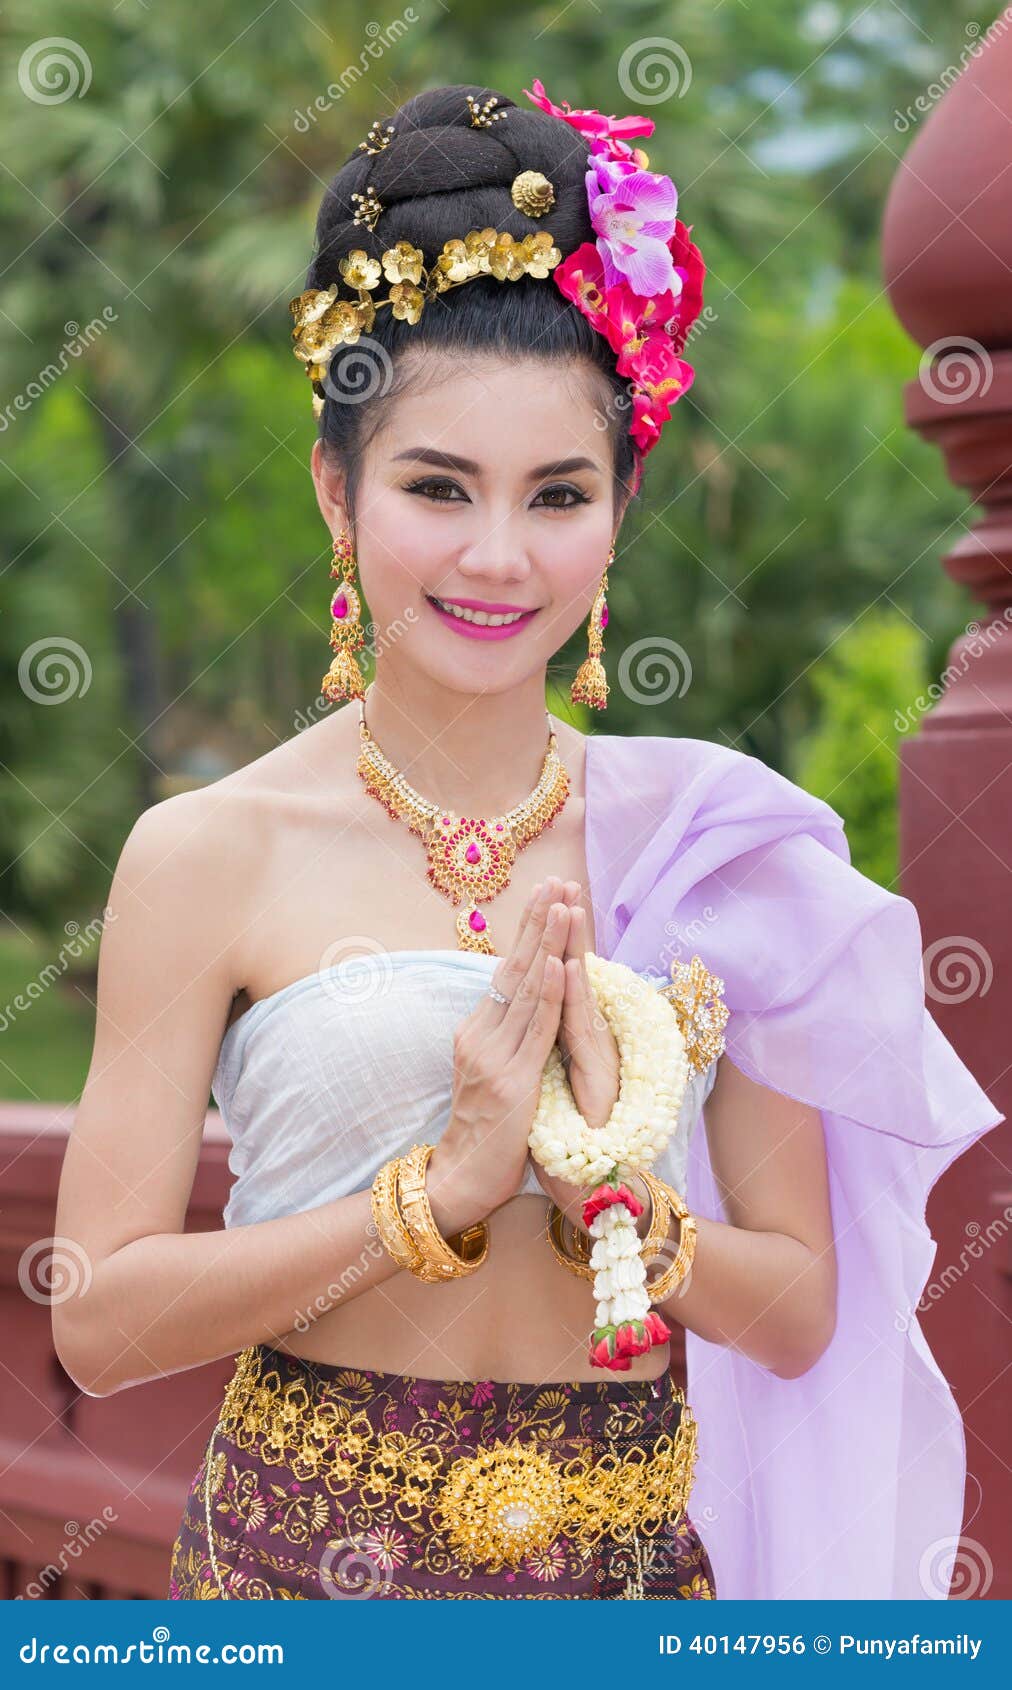 Thai Woman In Traditional Dress Editorial Image - Image 